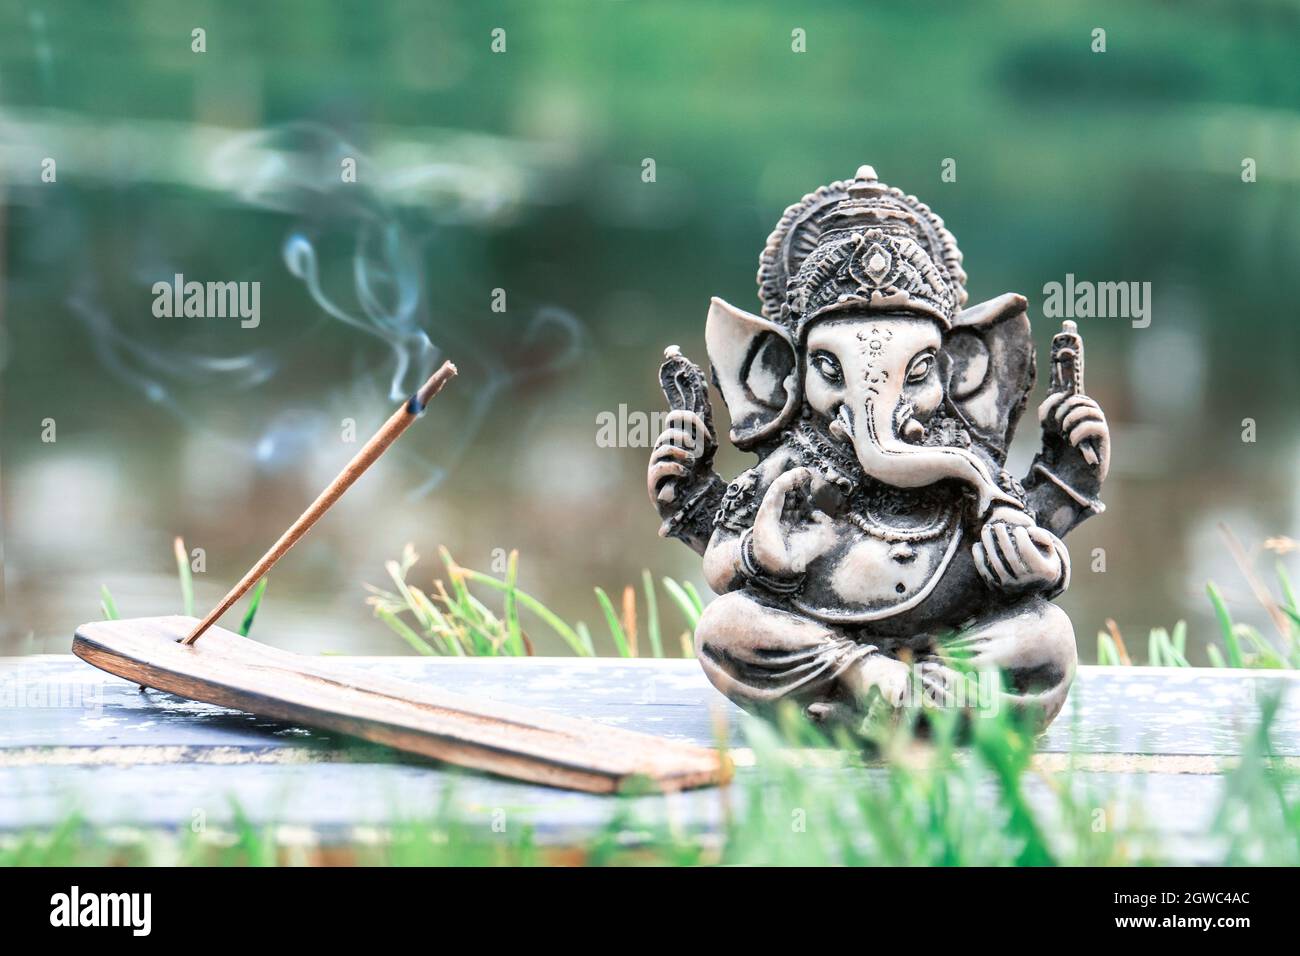 Sculpture Of Ganesha God With Aroma Stick In The Background